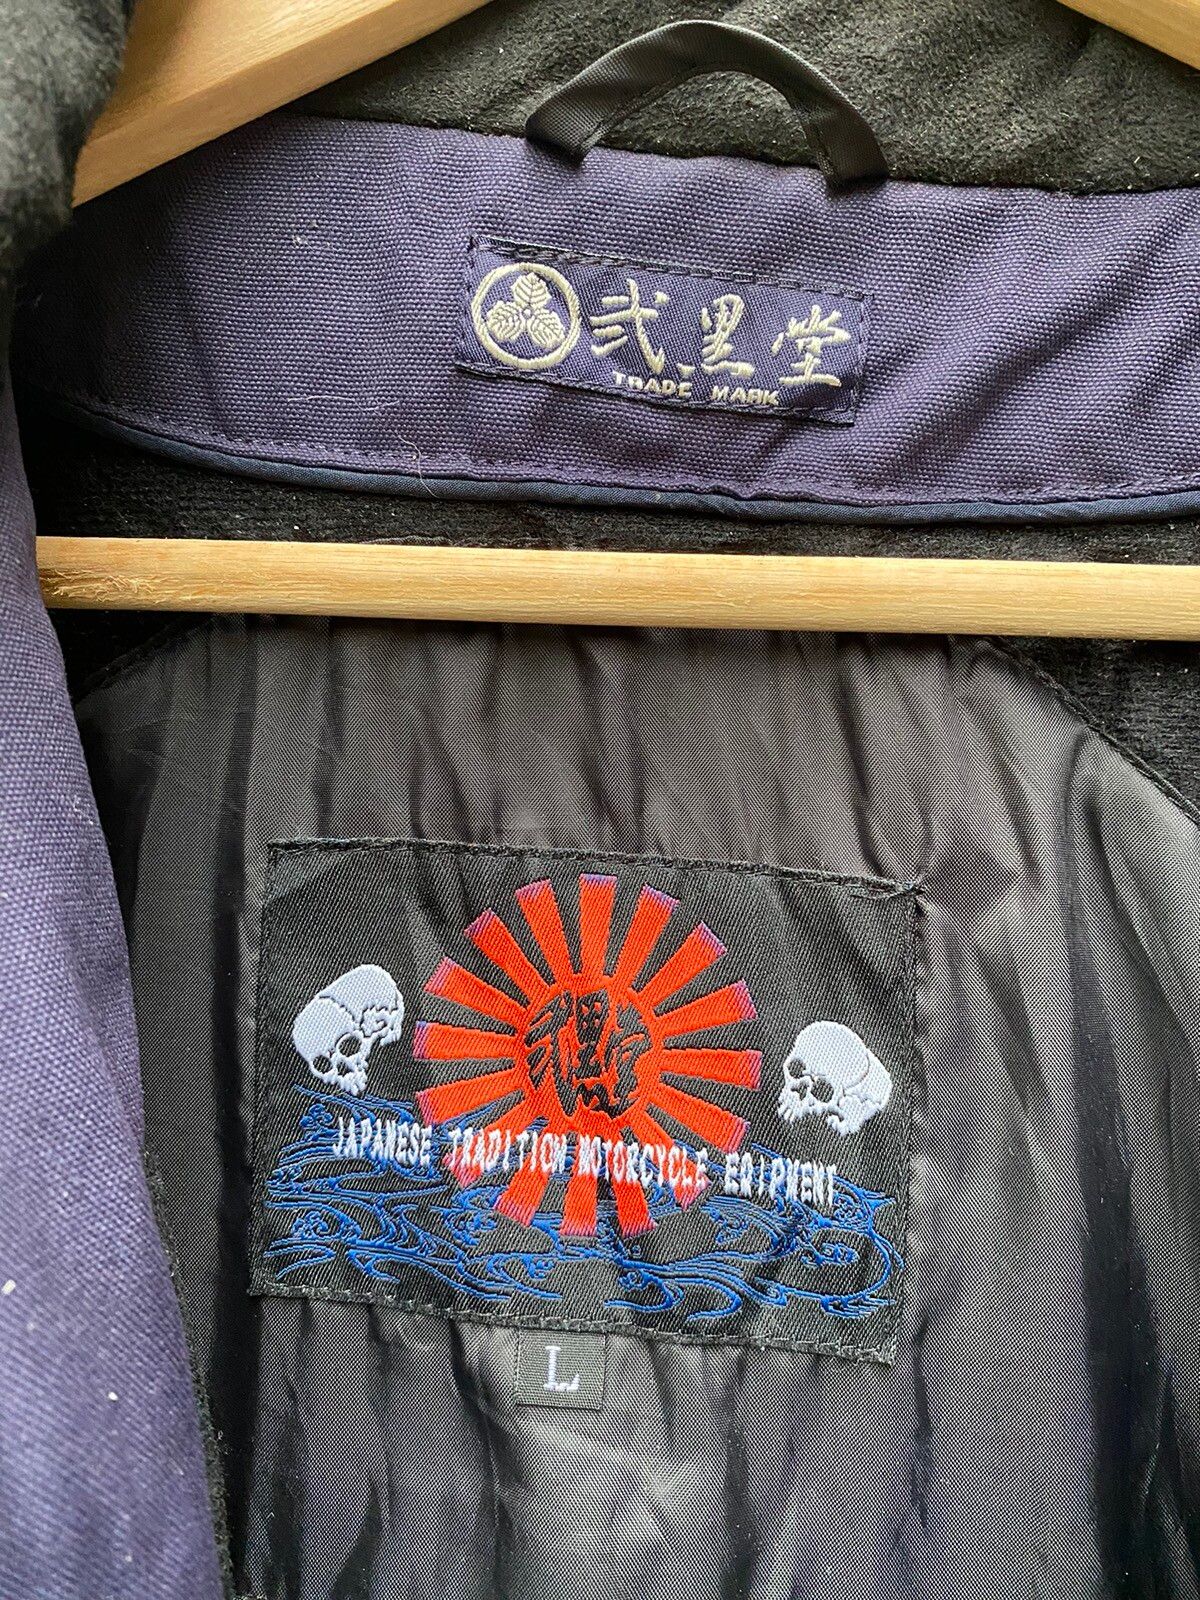 Sports Specialties - 🔥 Japanese Tradition Motorcycle Riding Jacket Rare Design - 13